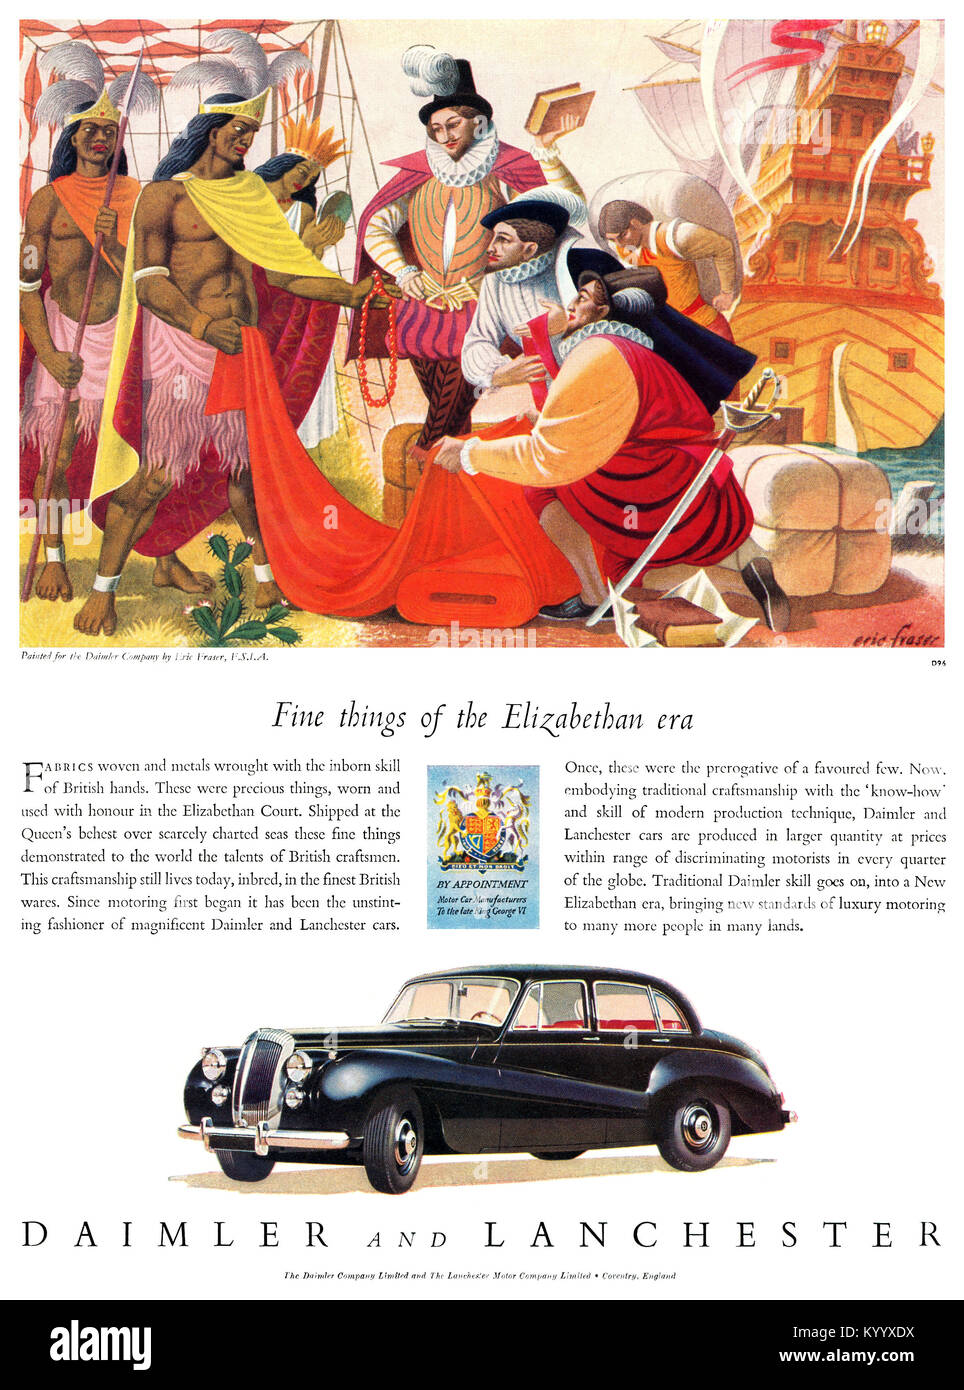 1953 British advertisement for Daimler and Lanchester cars, illustrated by Eric Fraser. Stock Photo